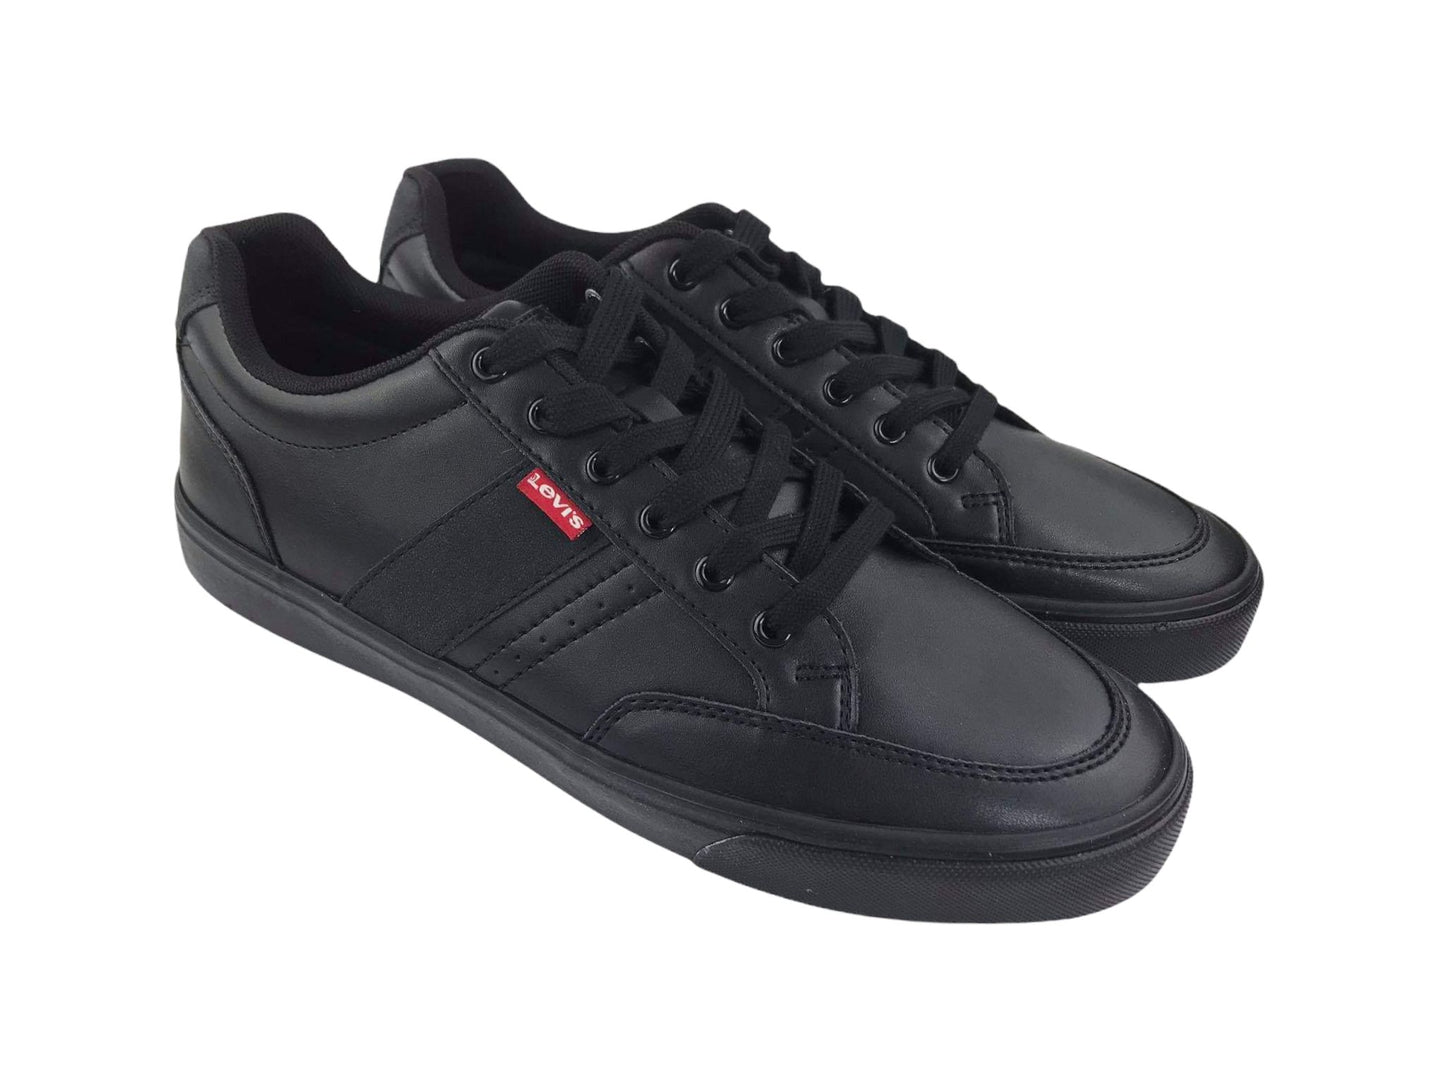 Levi's | Turner 2.0 Full Black men's street sneakers with laces